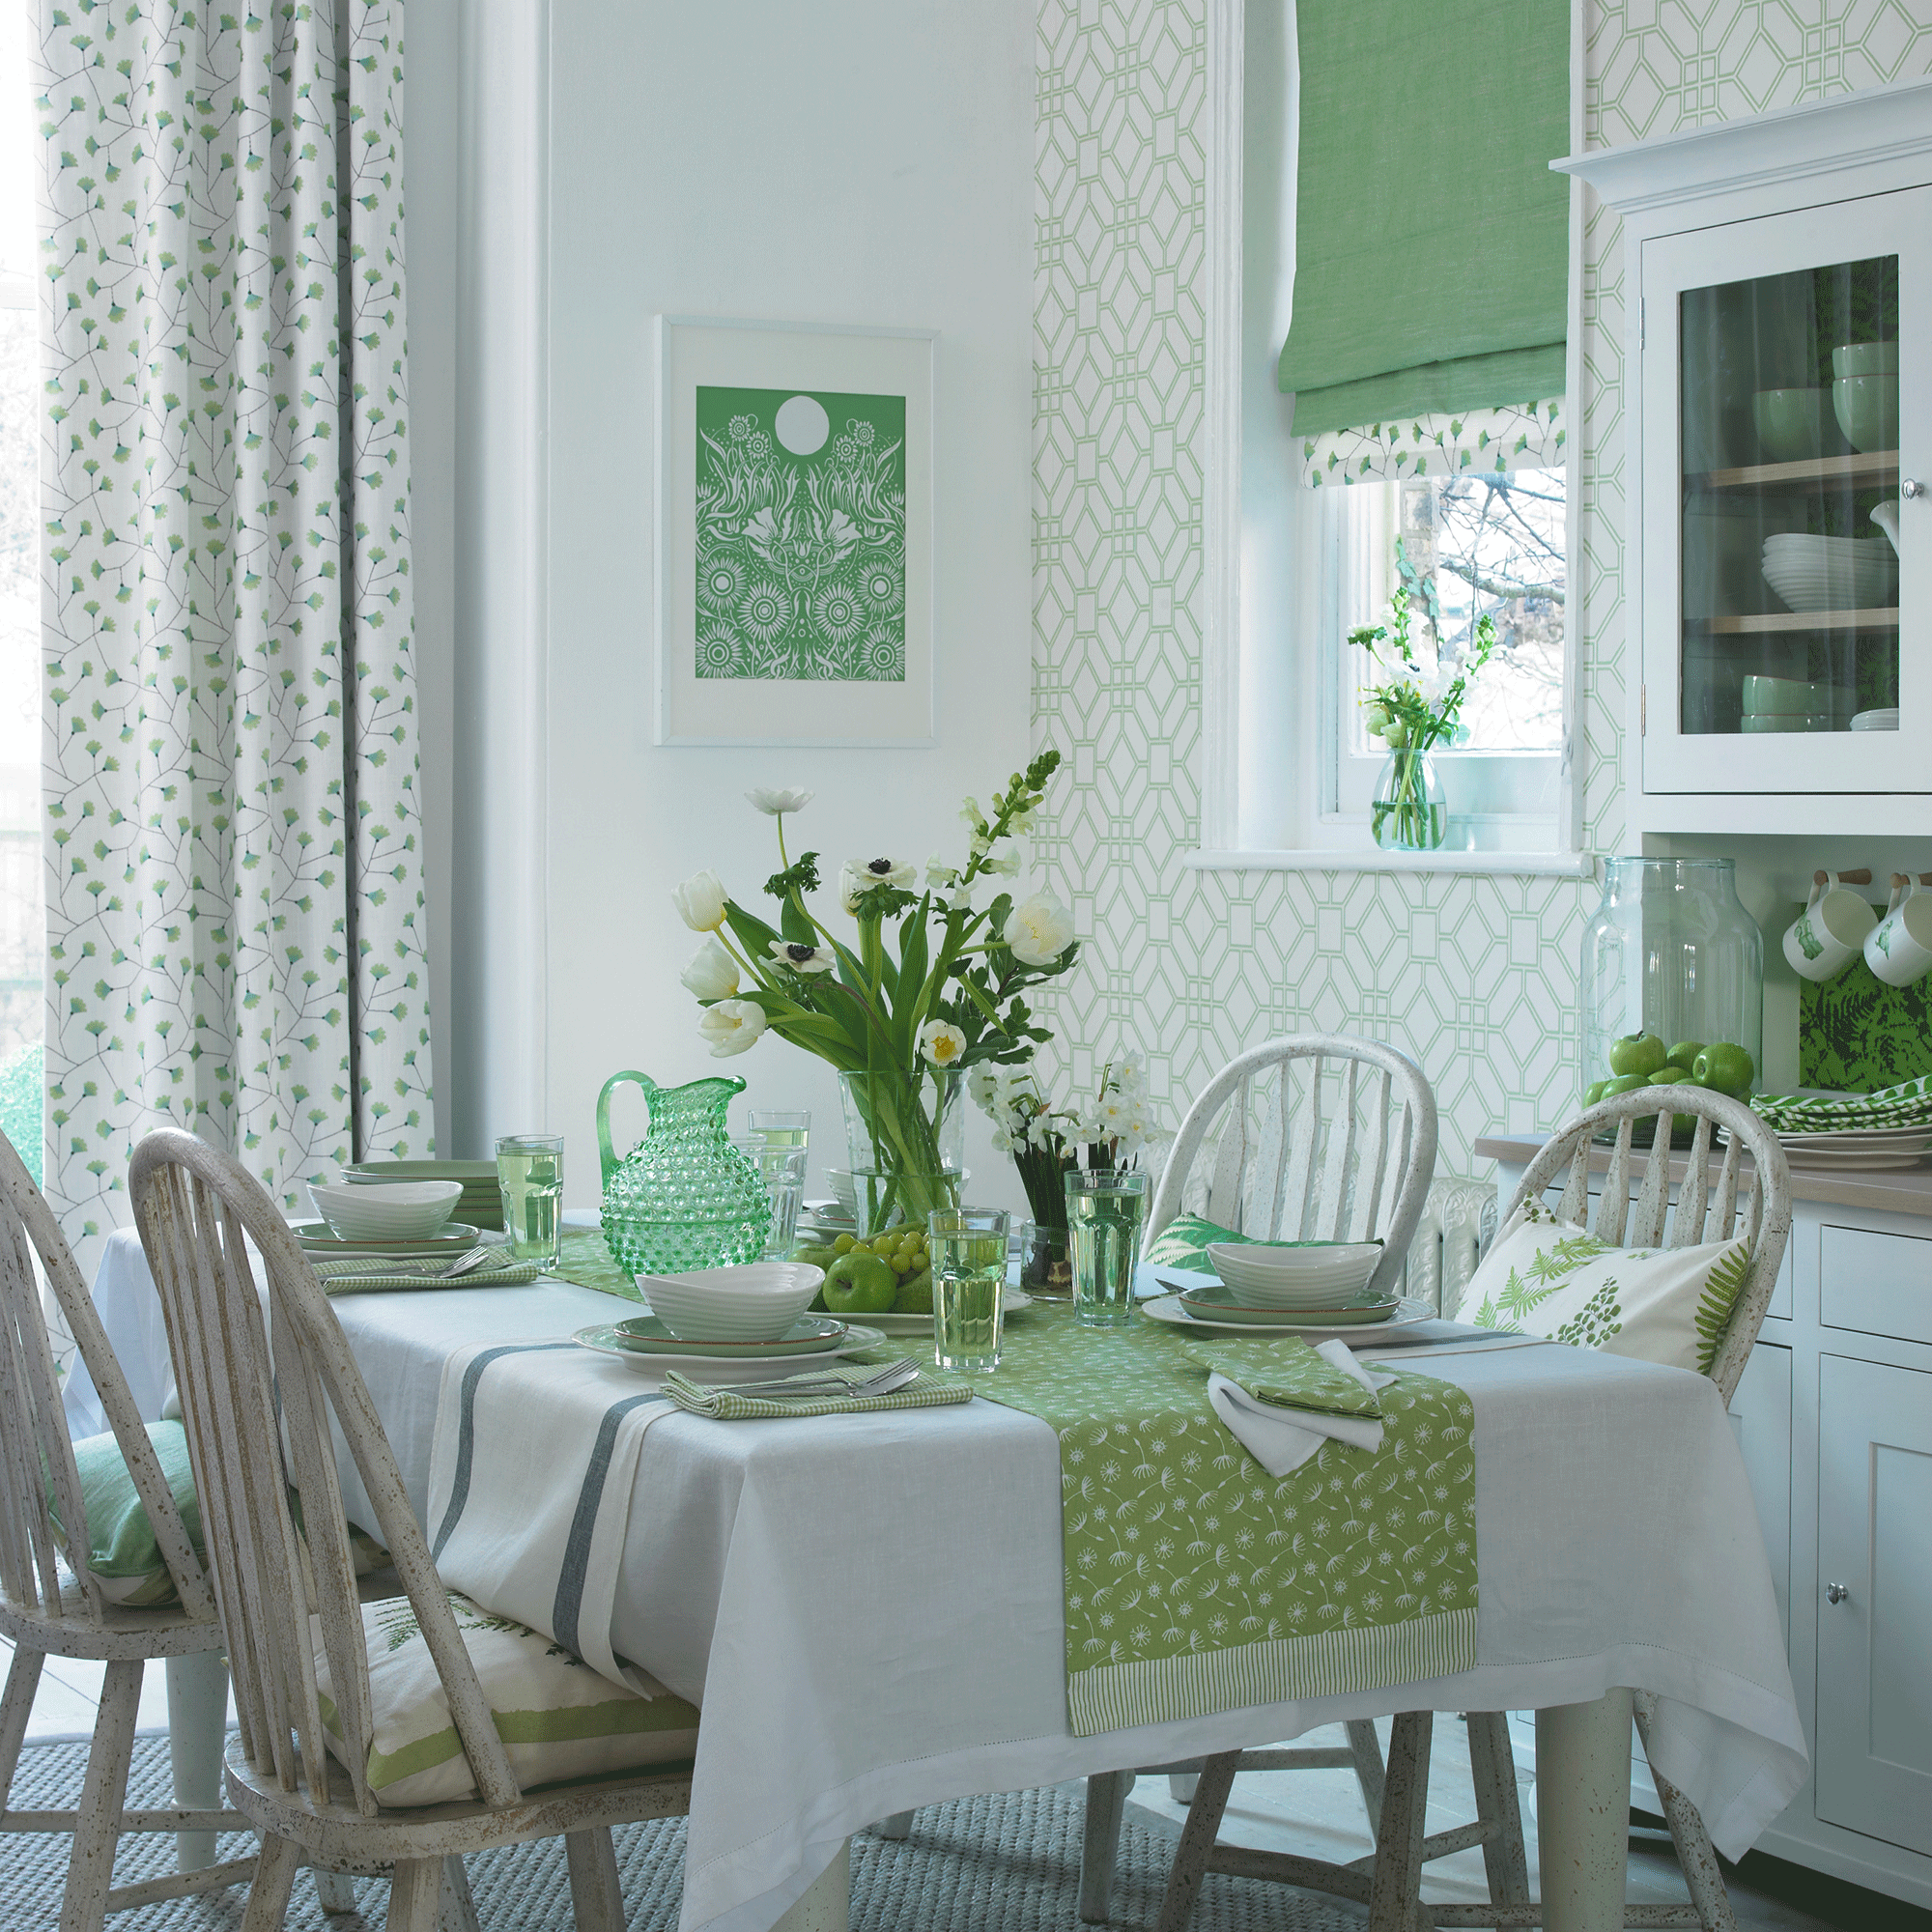 White walls with green patterned blinds